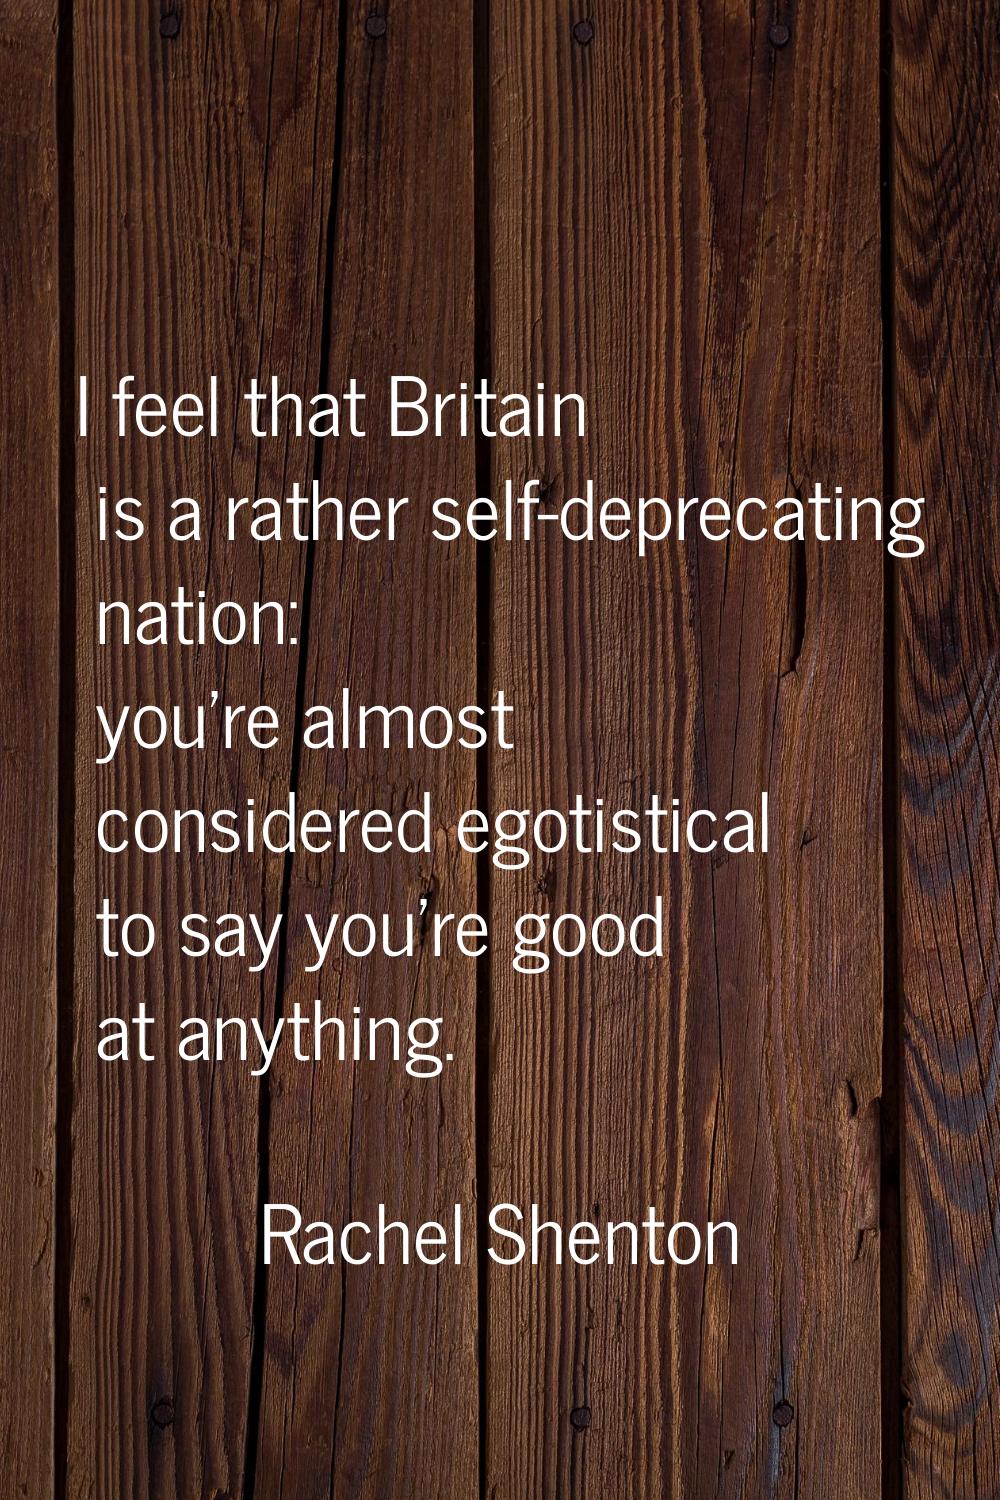 I feel that Britain is a rather self-deprecating nation: you're almost considered egotistical to sa